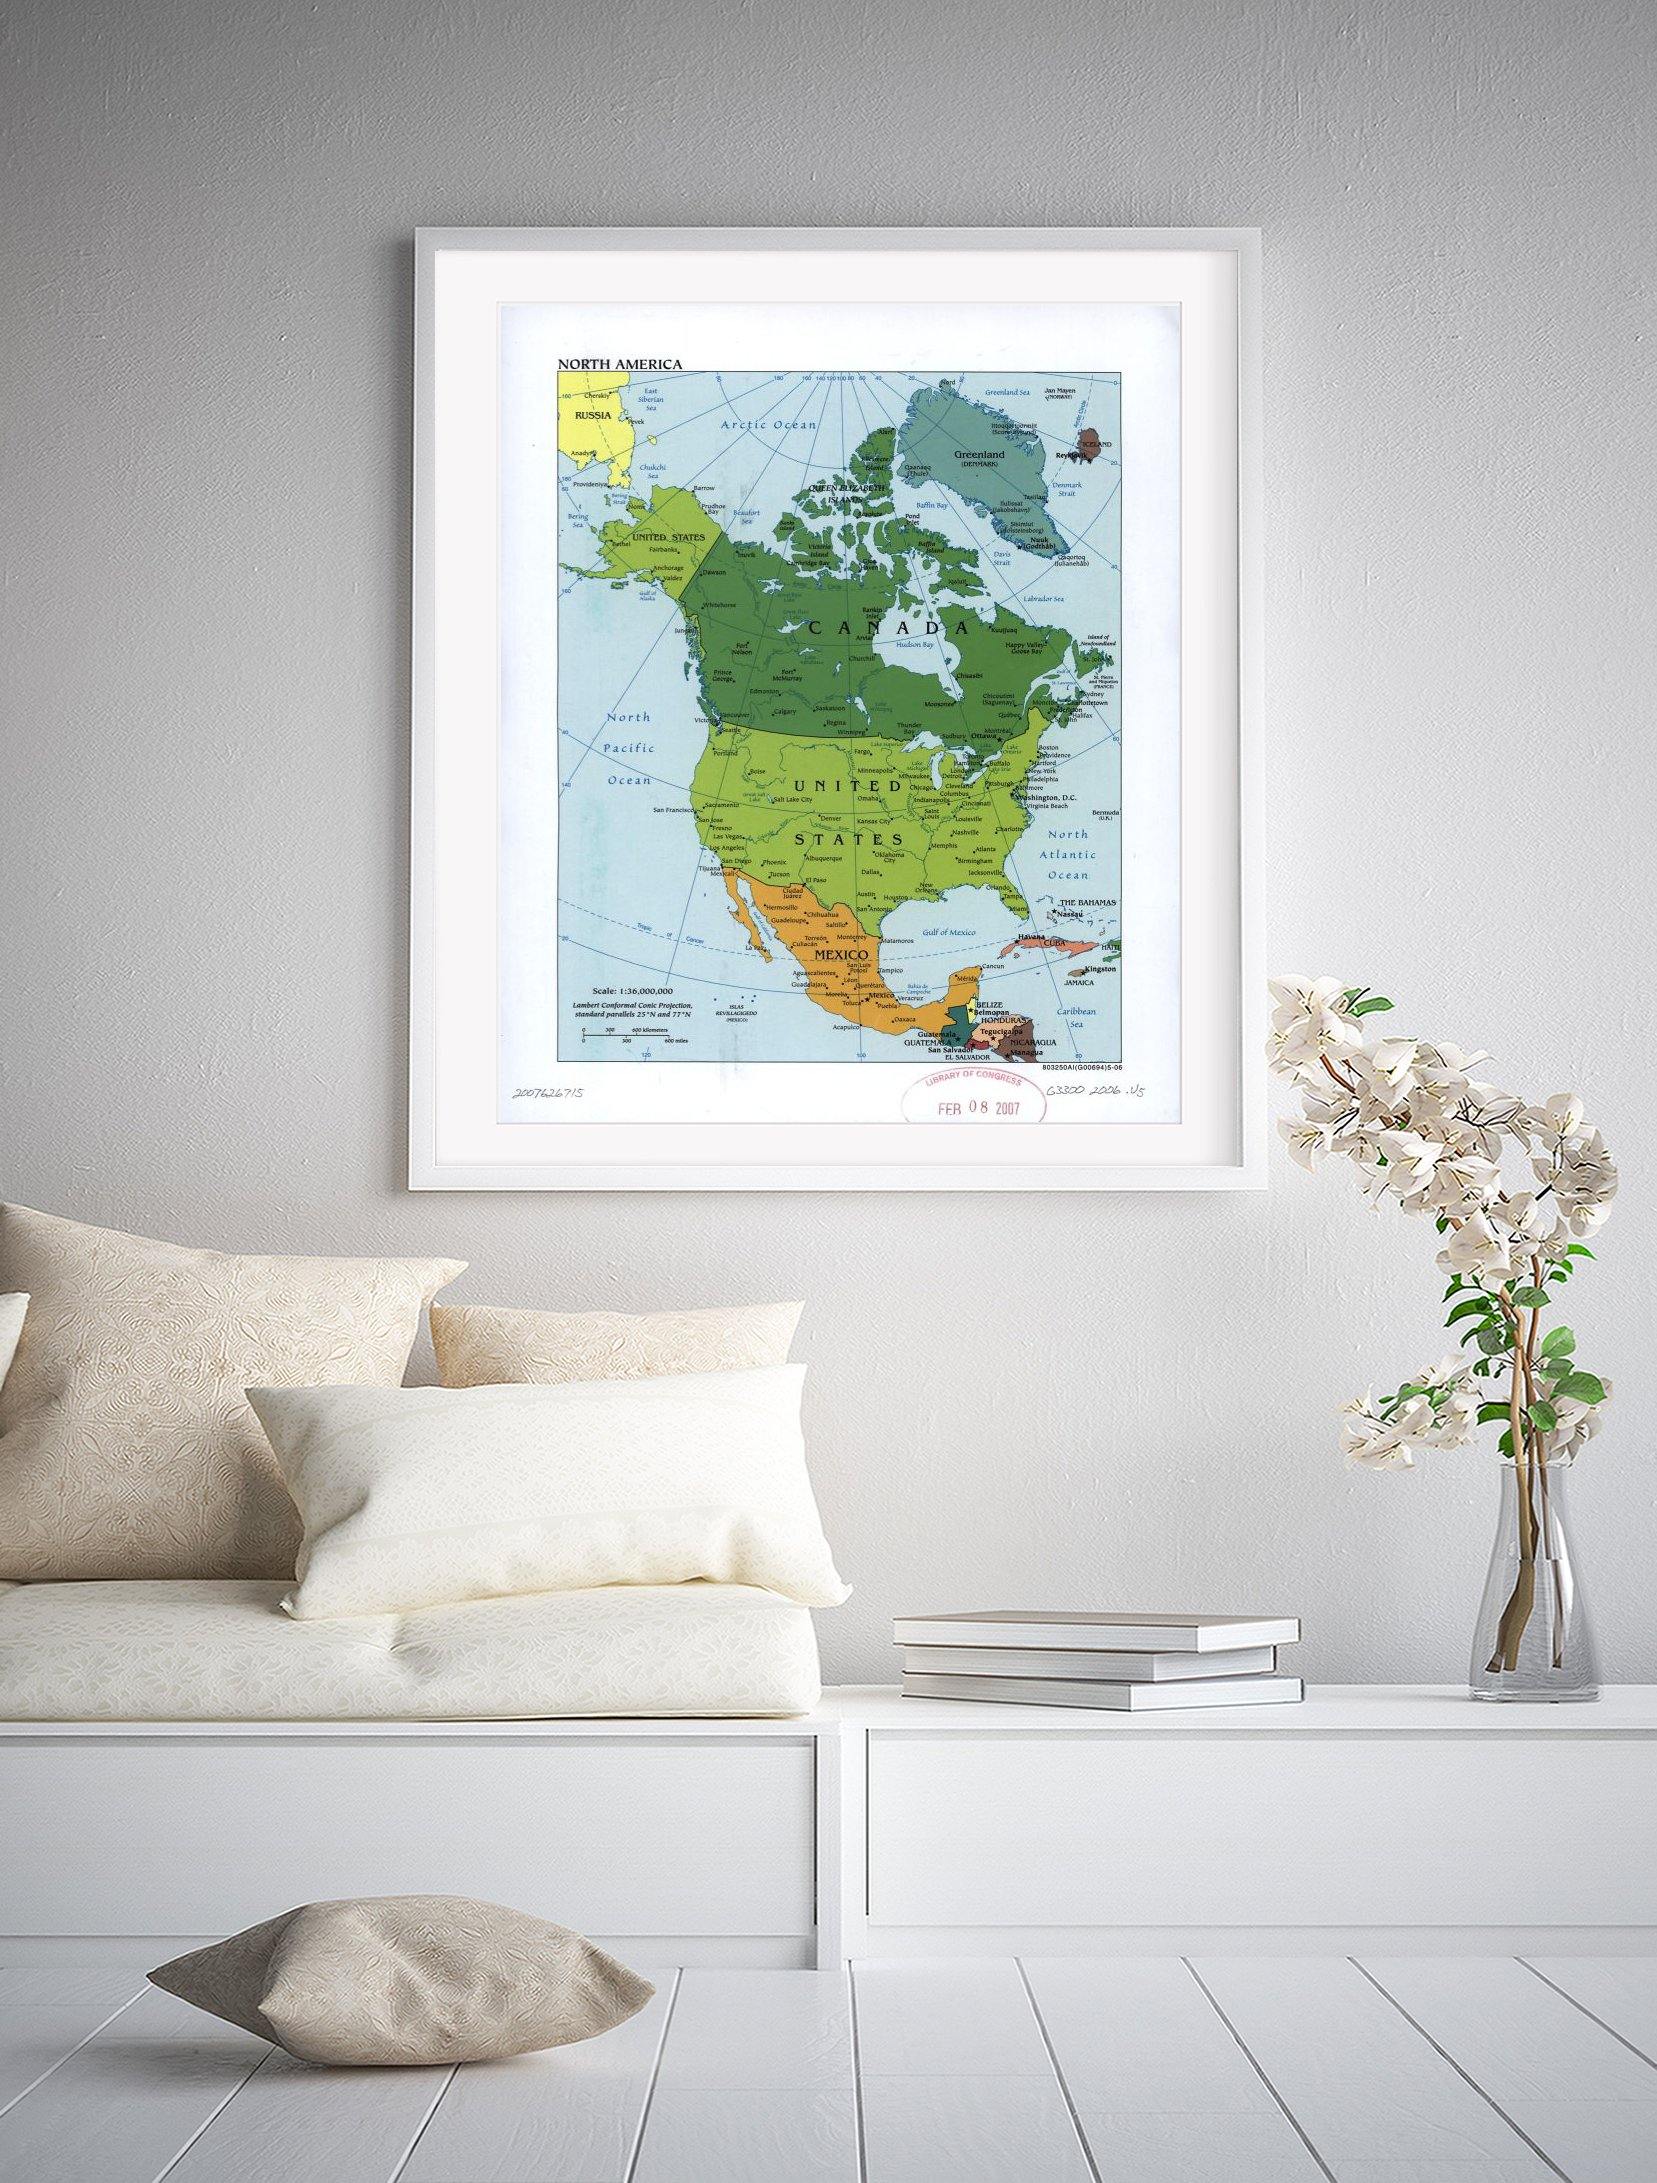 2006 Map| North America| North America Map Size: 20 inches x 24 inches - New York Map Company